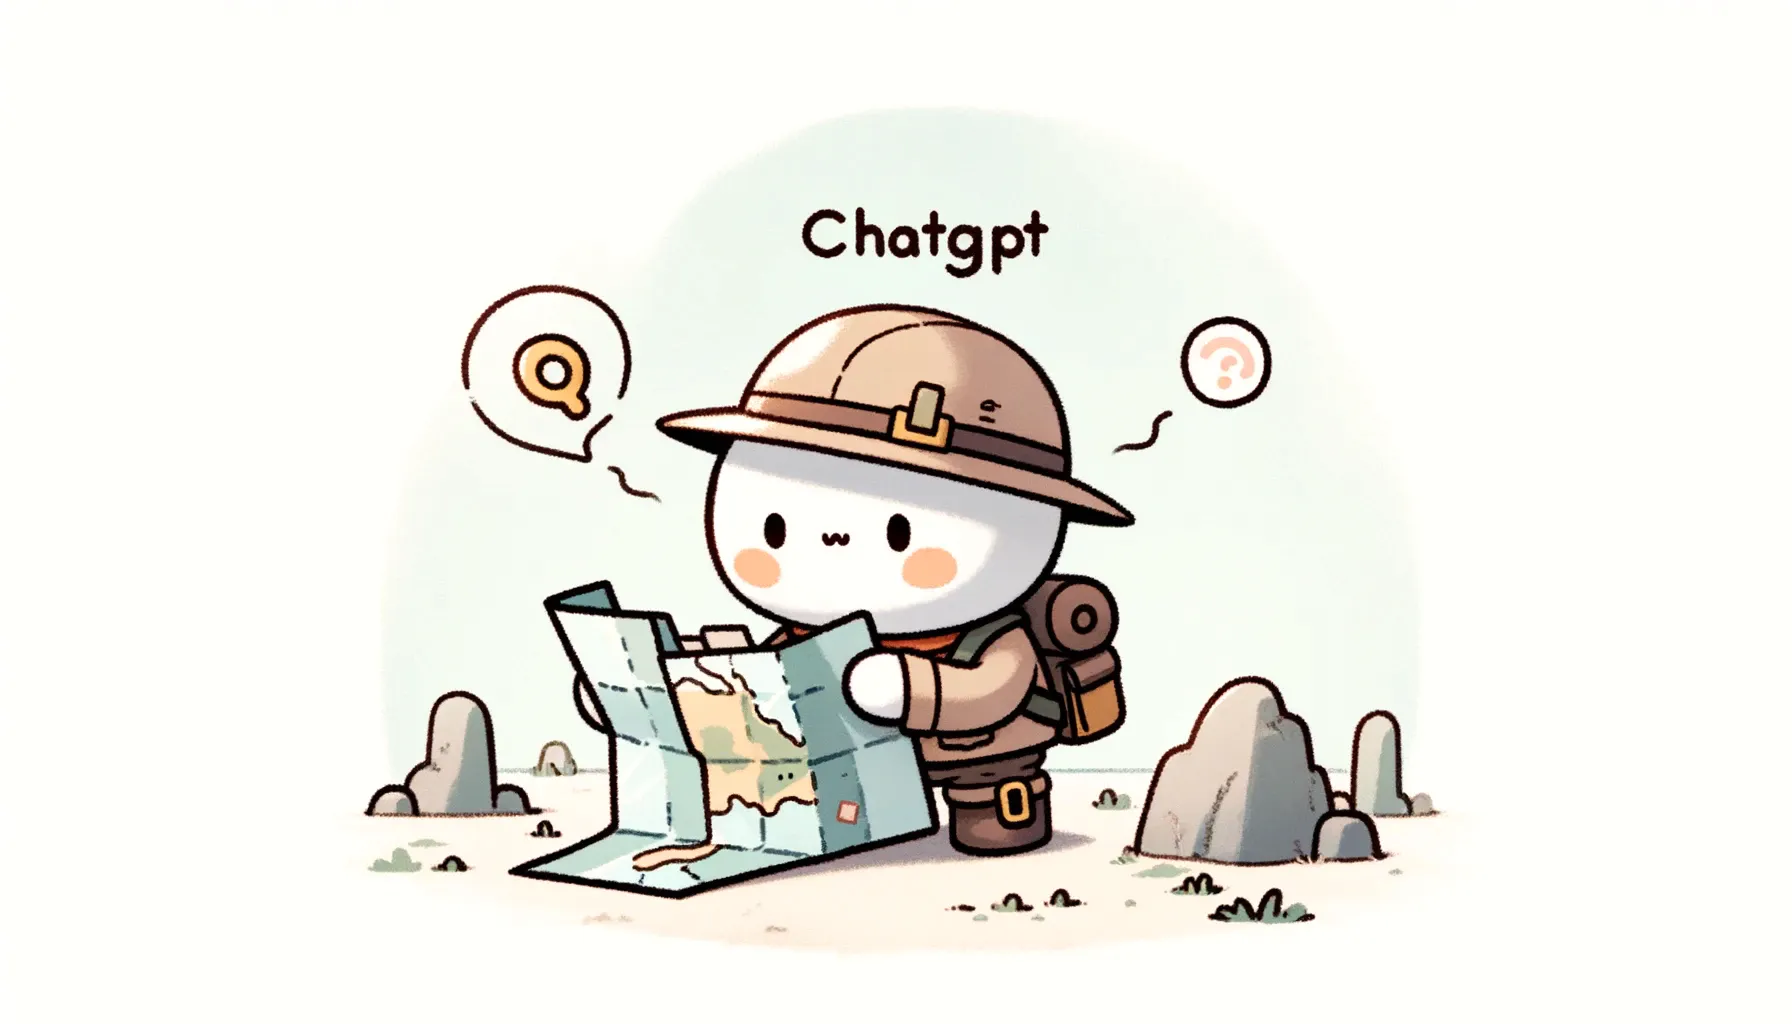 An illustration of an explorer, representing ChatGPT, consulting a map